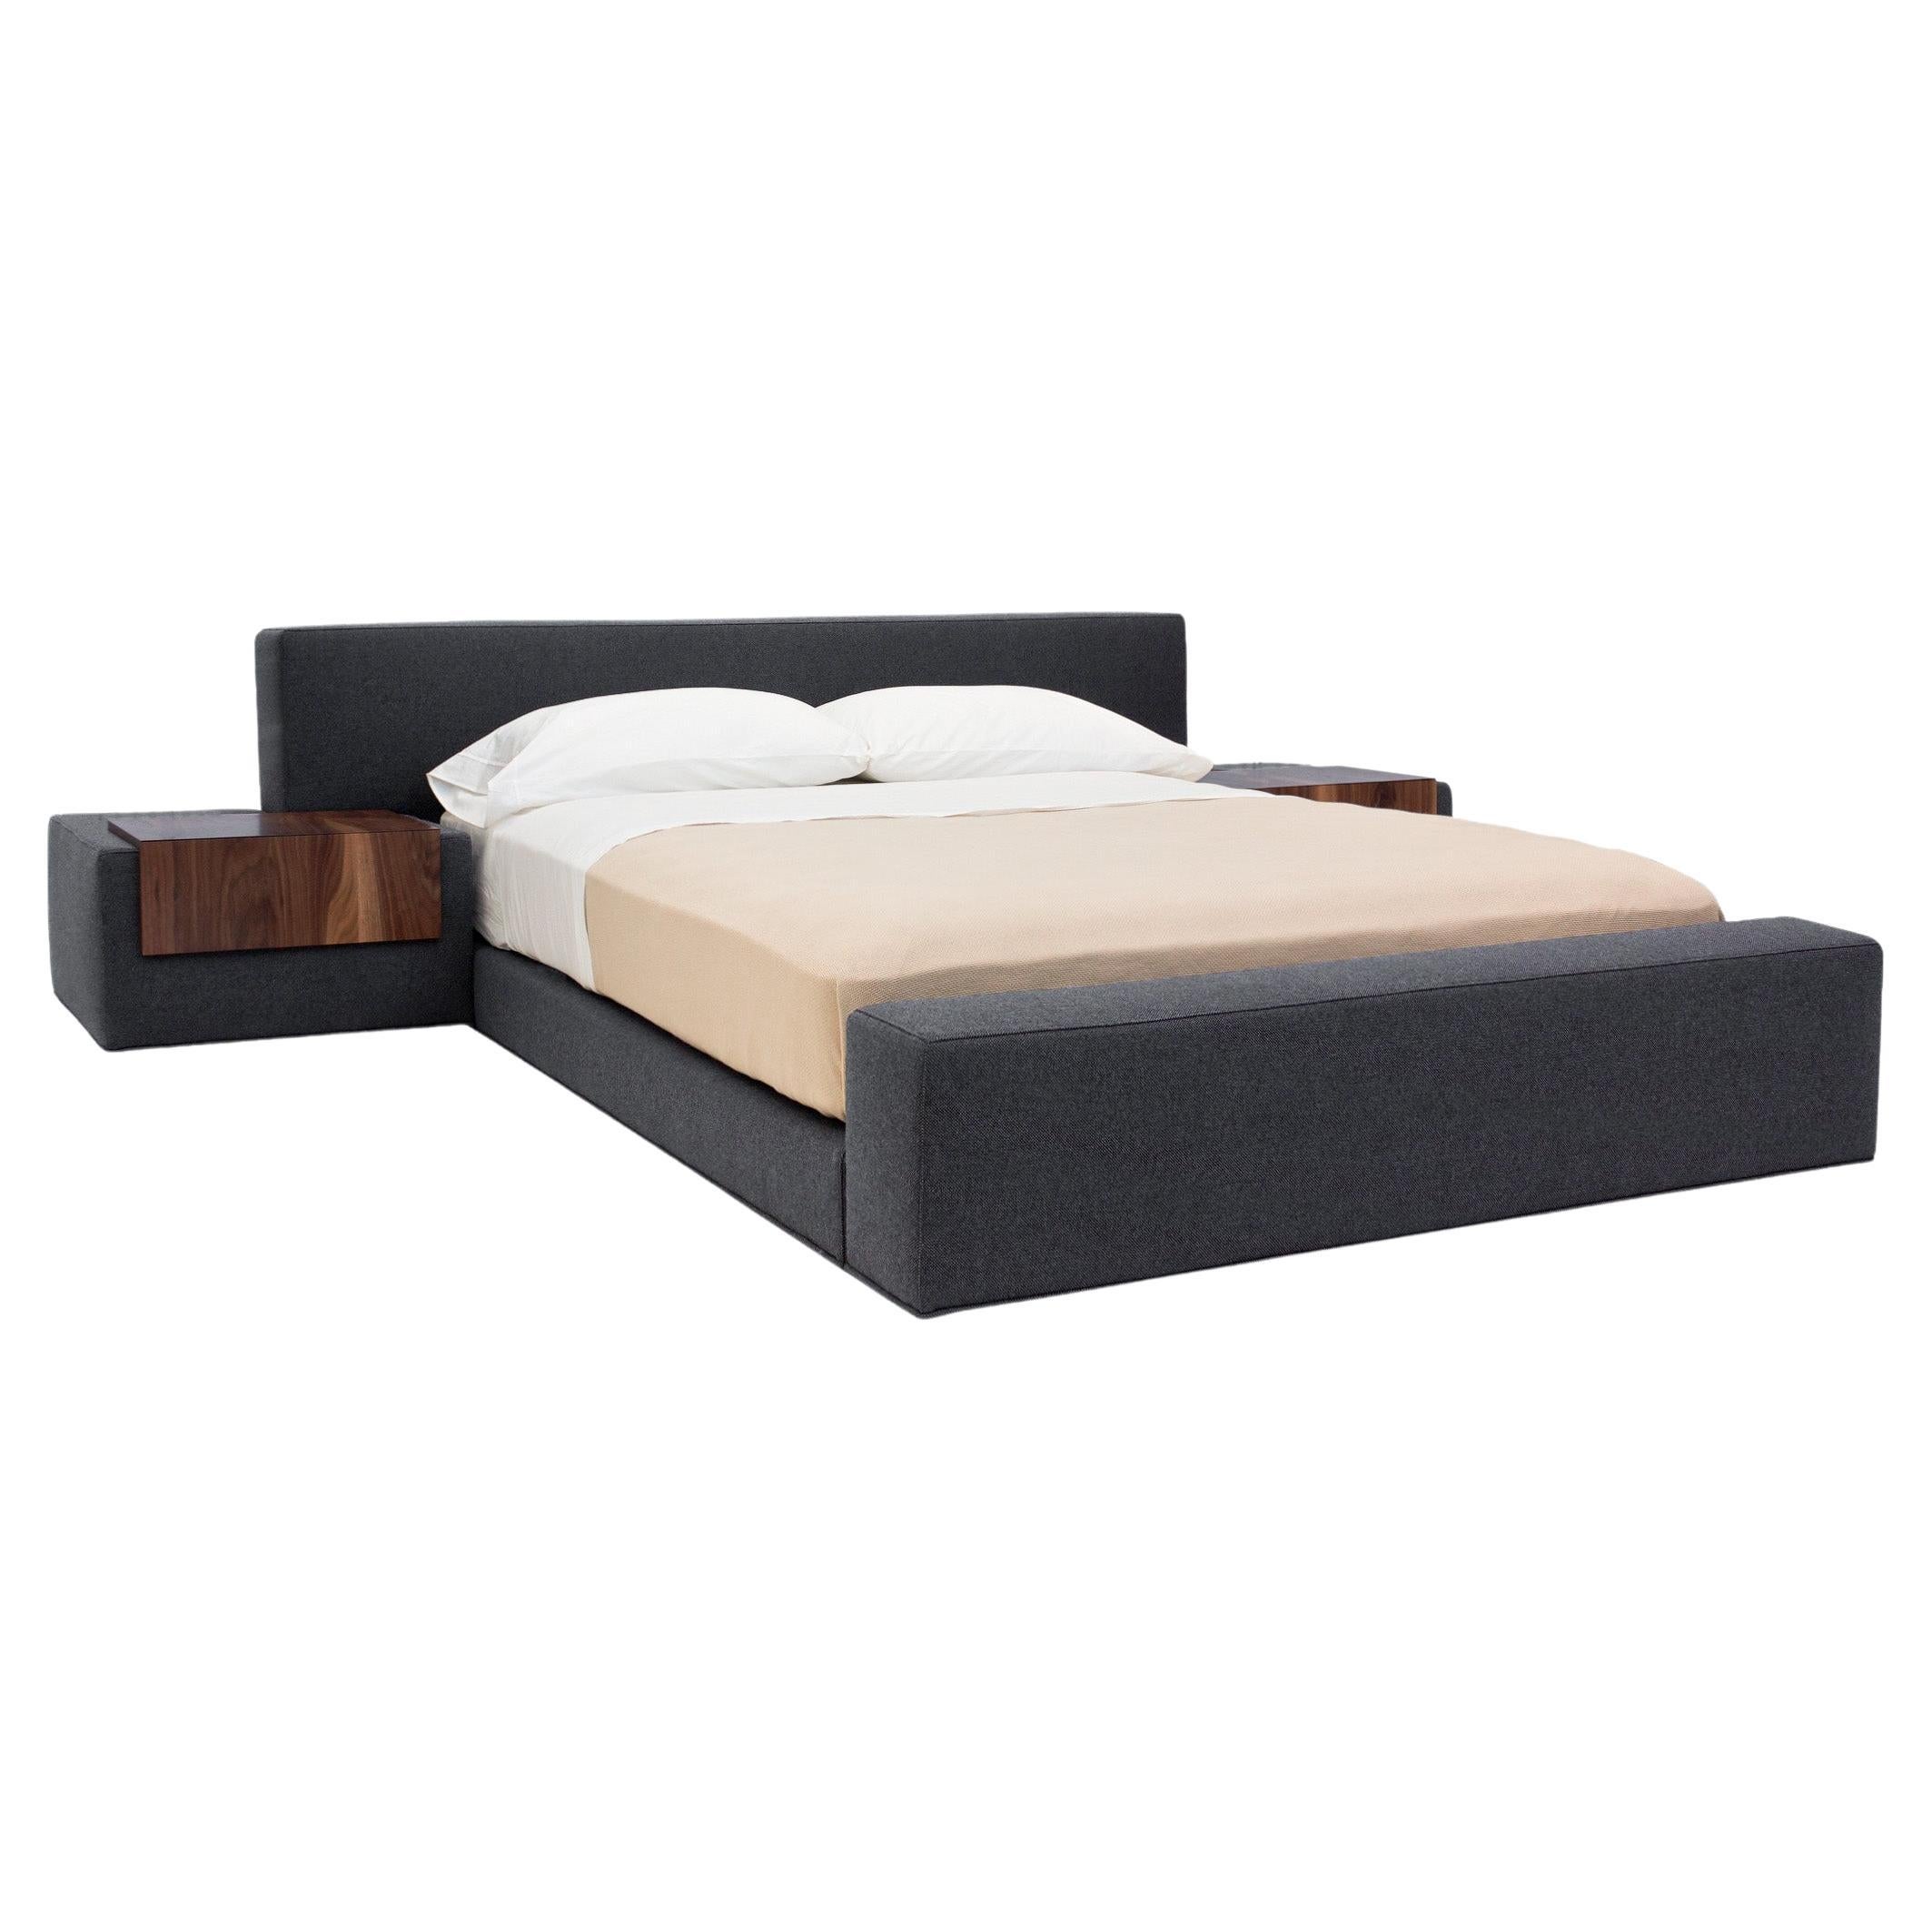 Good design doesn’t have to sacrifice functionality. The Zurich Bed is a unique bed where the nightstands are part of the bed itself.  The upholstered drawer units each have a “camouflaged” drawer, looking like a solid piece of wood. The extra wide